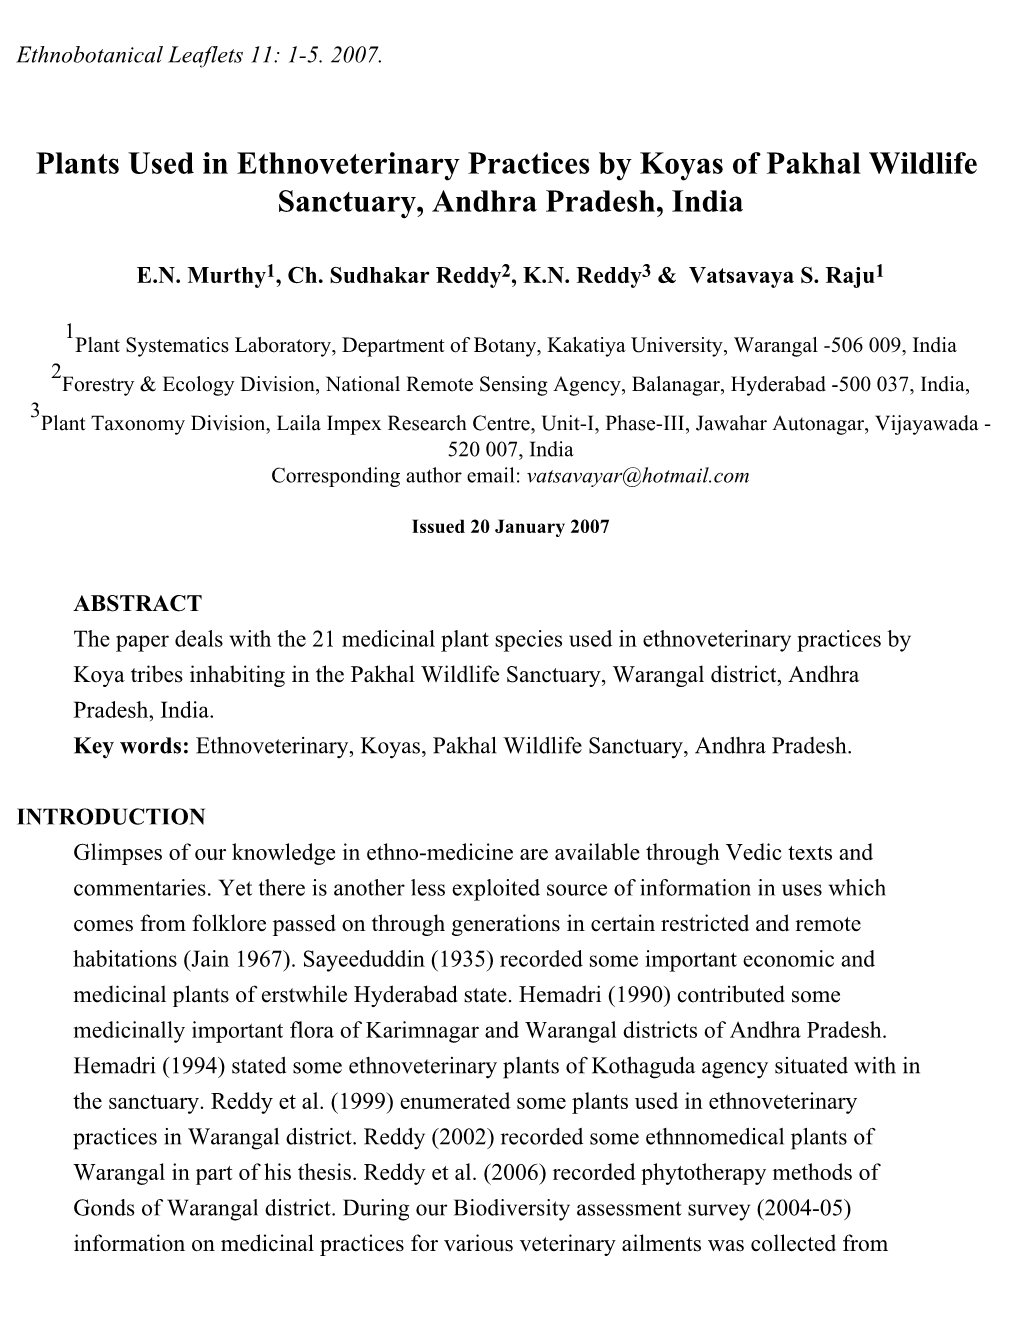 Plants Used in Ethnoveterinary Practices by Koyas of Pakhal Wildlife Sanctuary, Andhra Pradesh, India